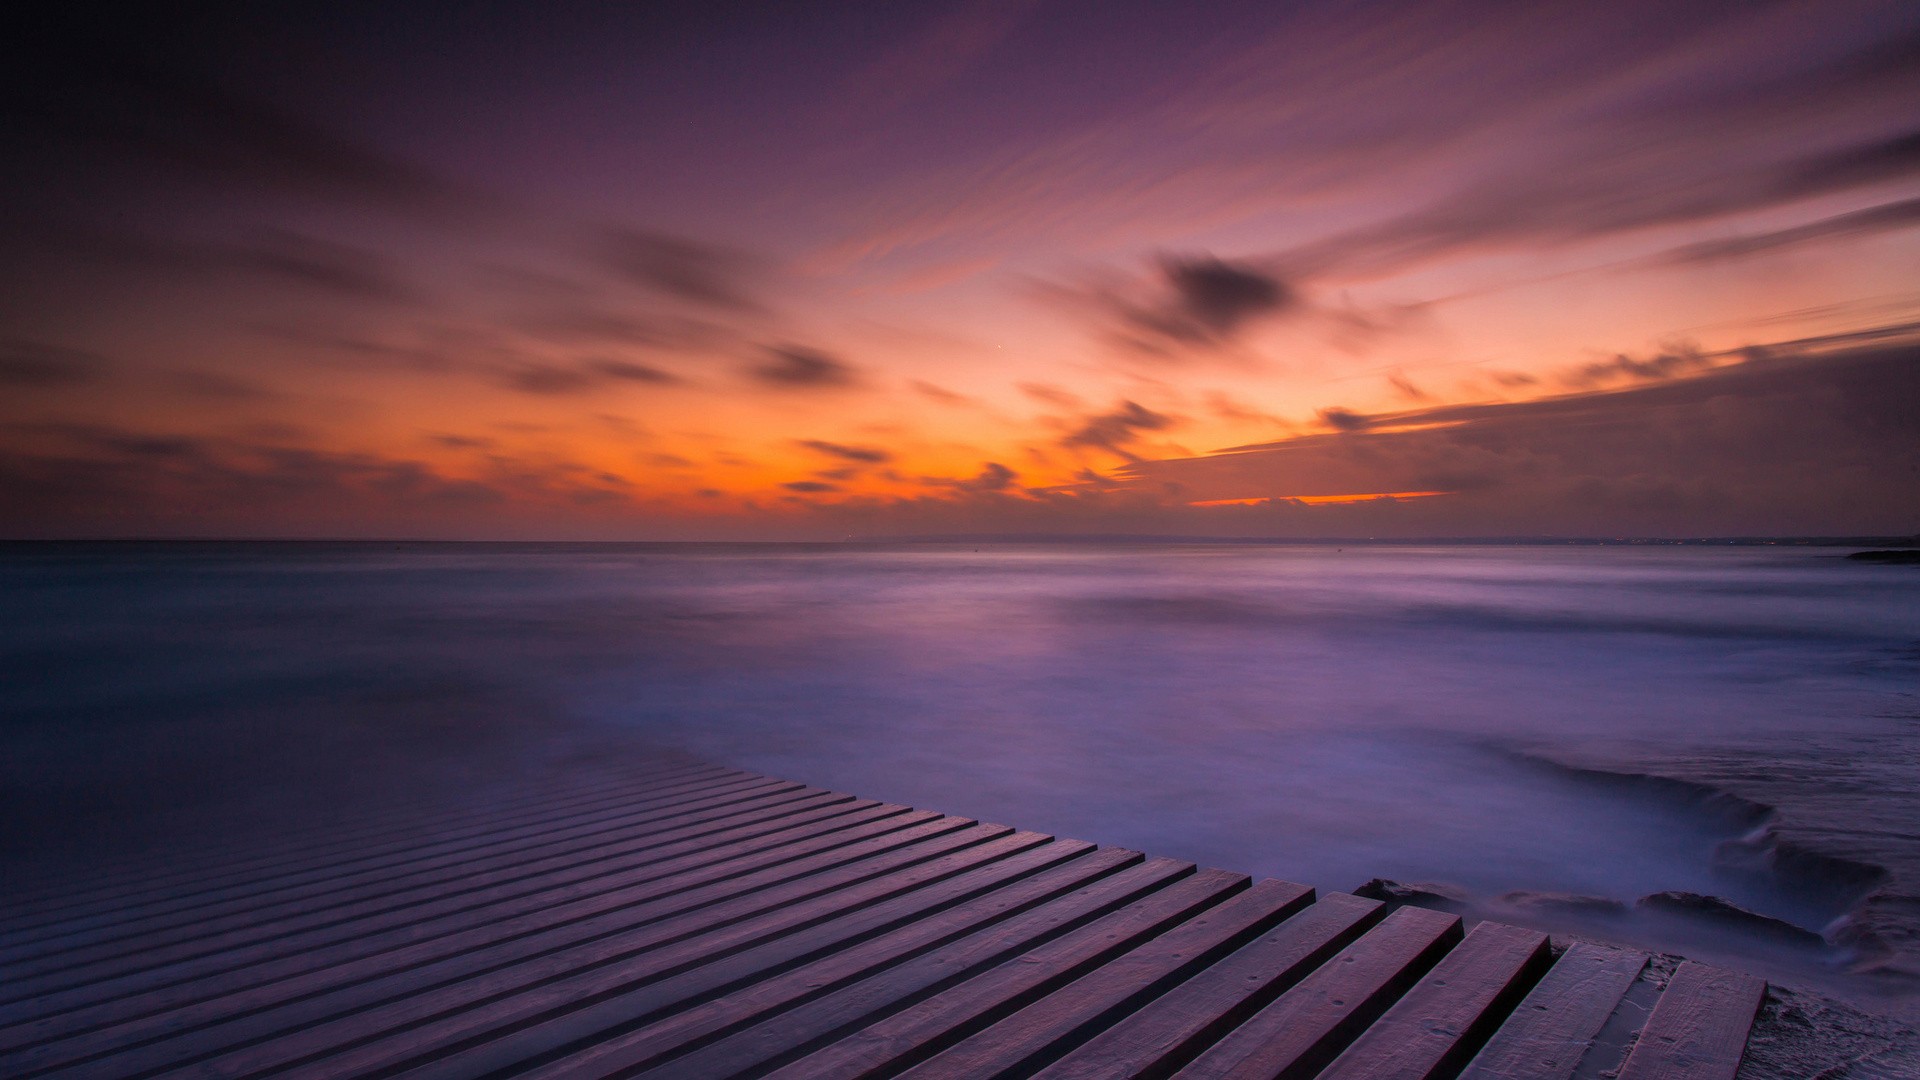 General 1920x1080 nature water sea sunset clouds wooden surface pier rocks horizon waves planks long exposure